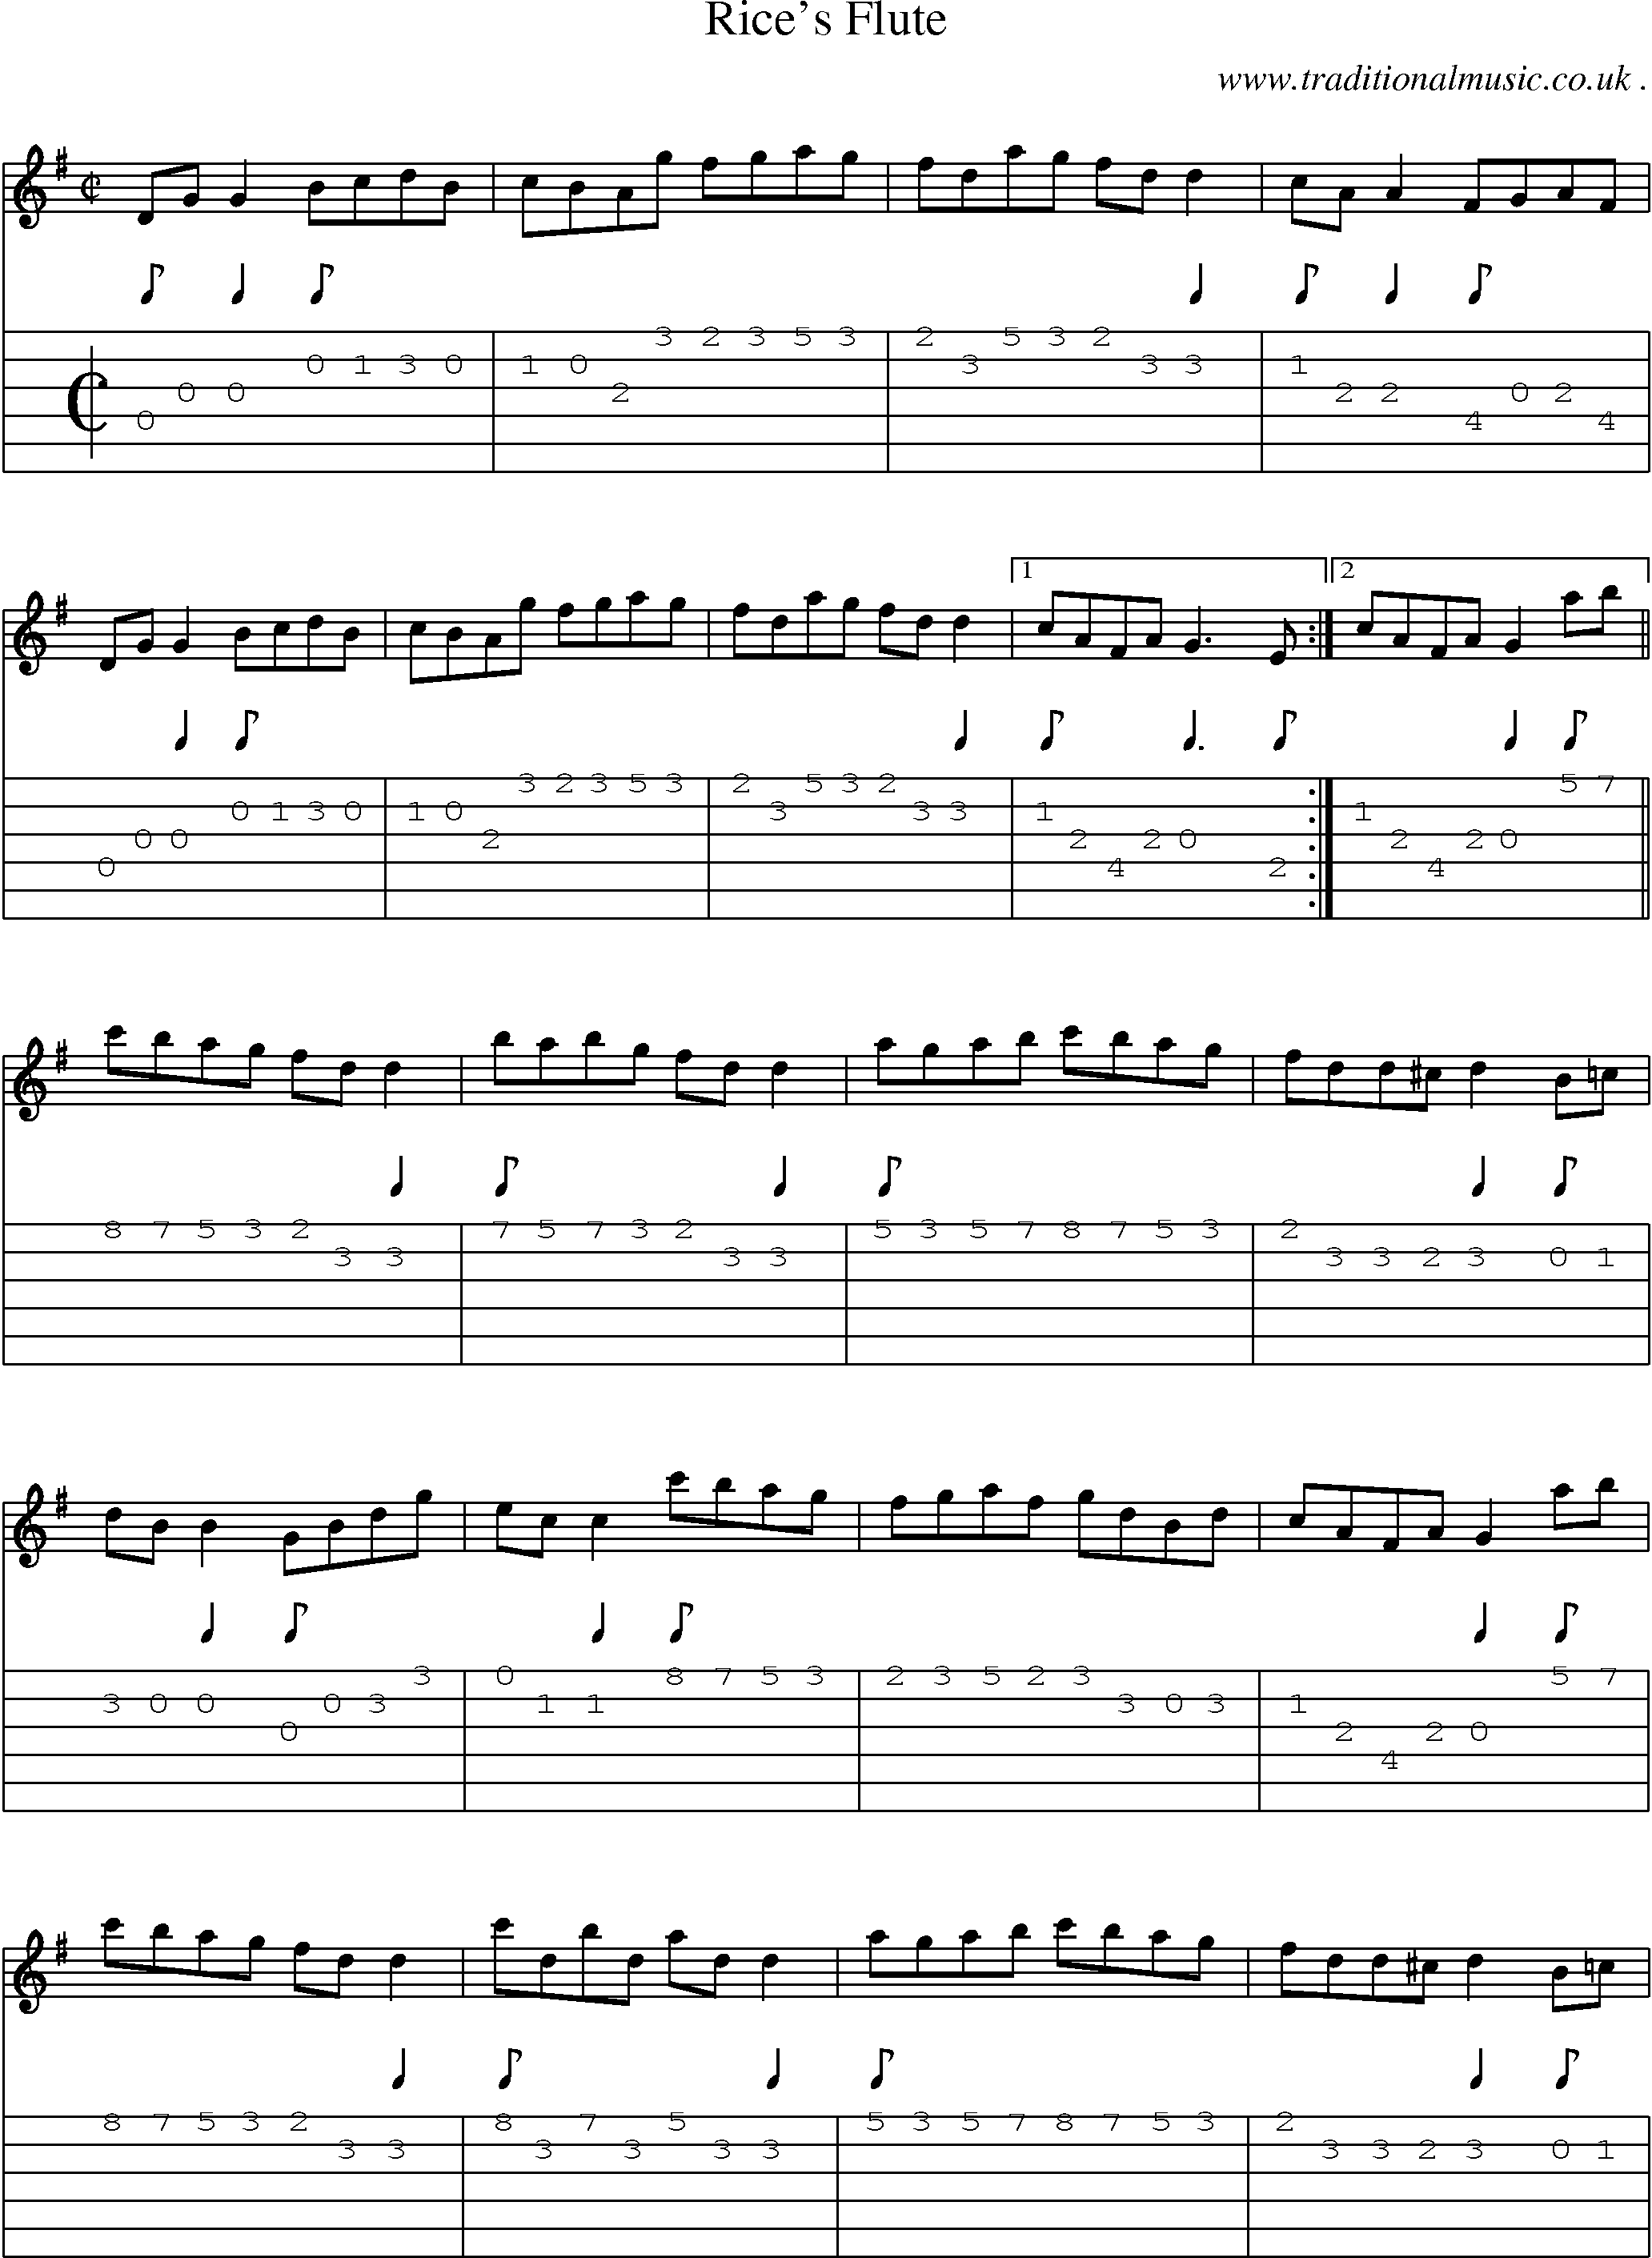 Sheet-Music and Guitar Tabs for Rices Flute